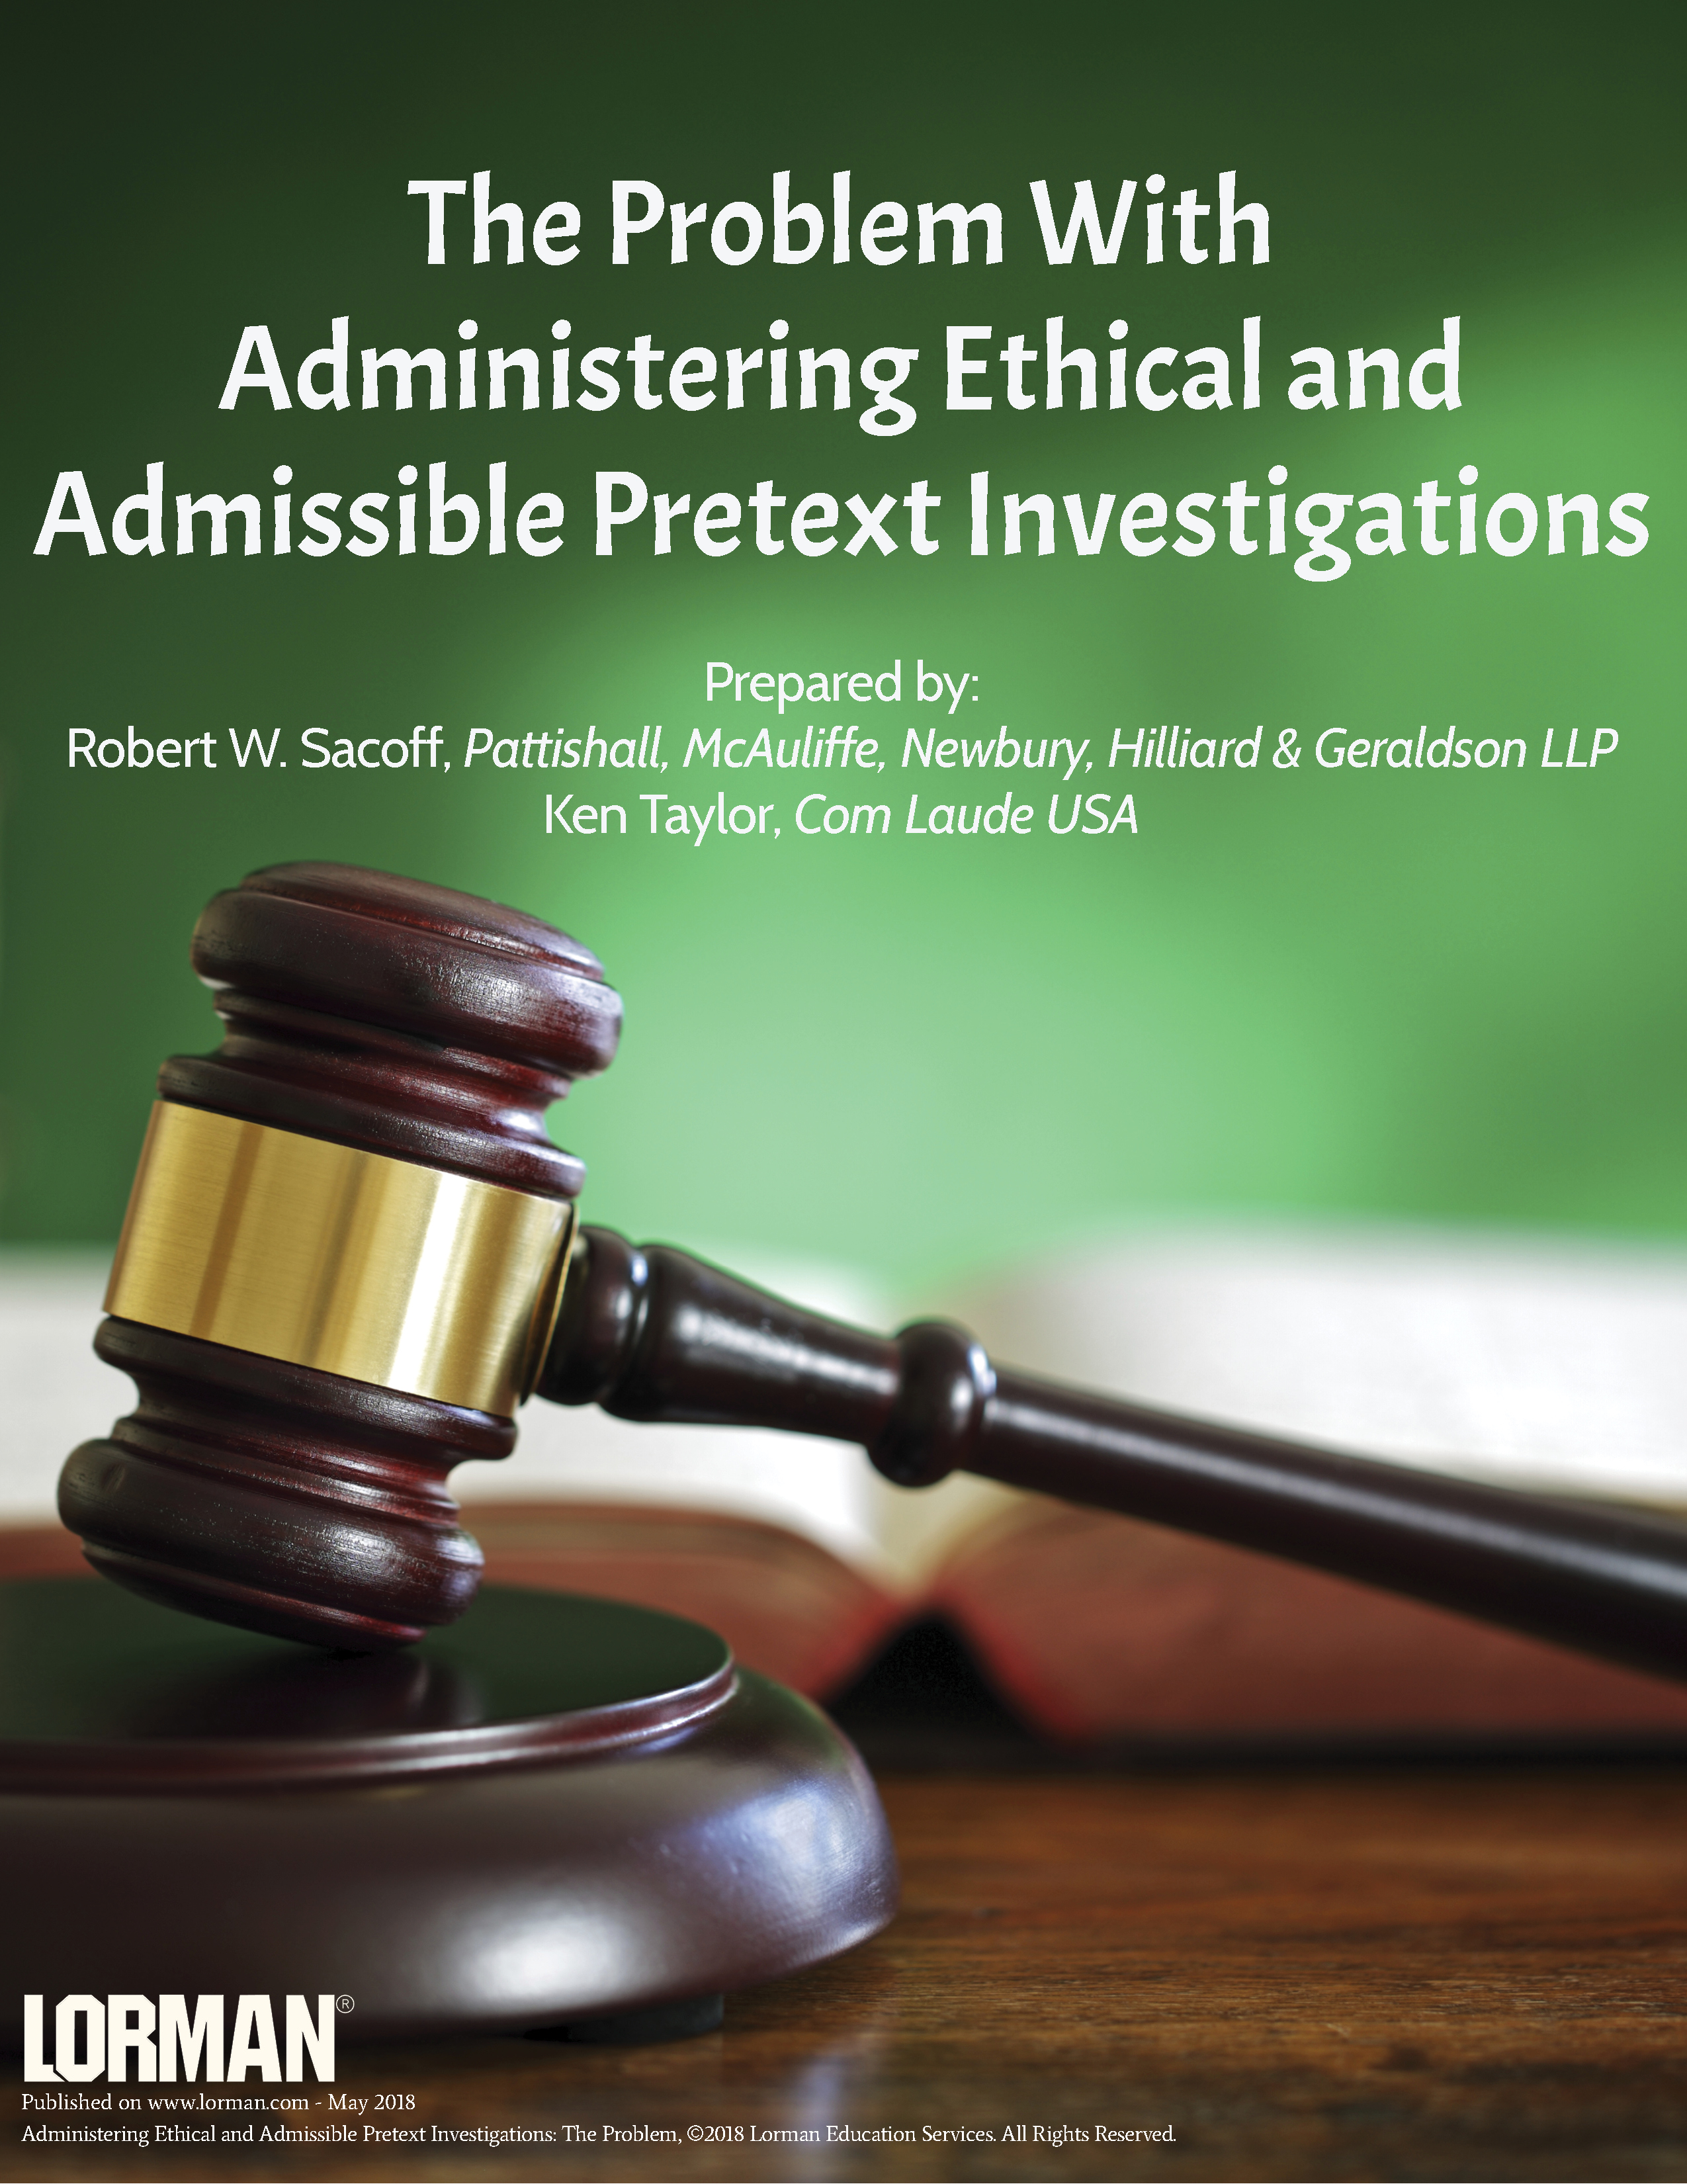 Administering Ethical and Admissible Pretext Investigations: The Problem